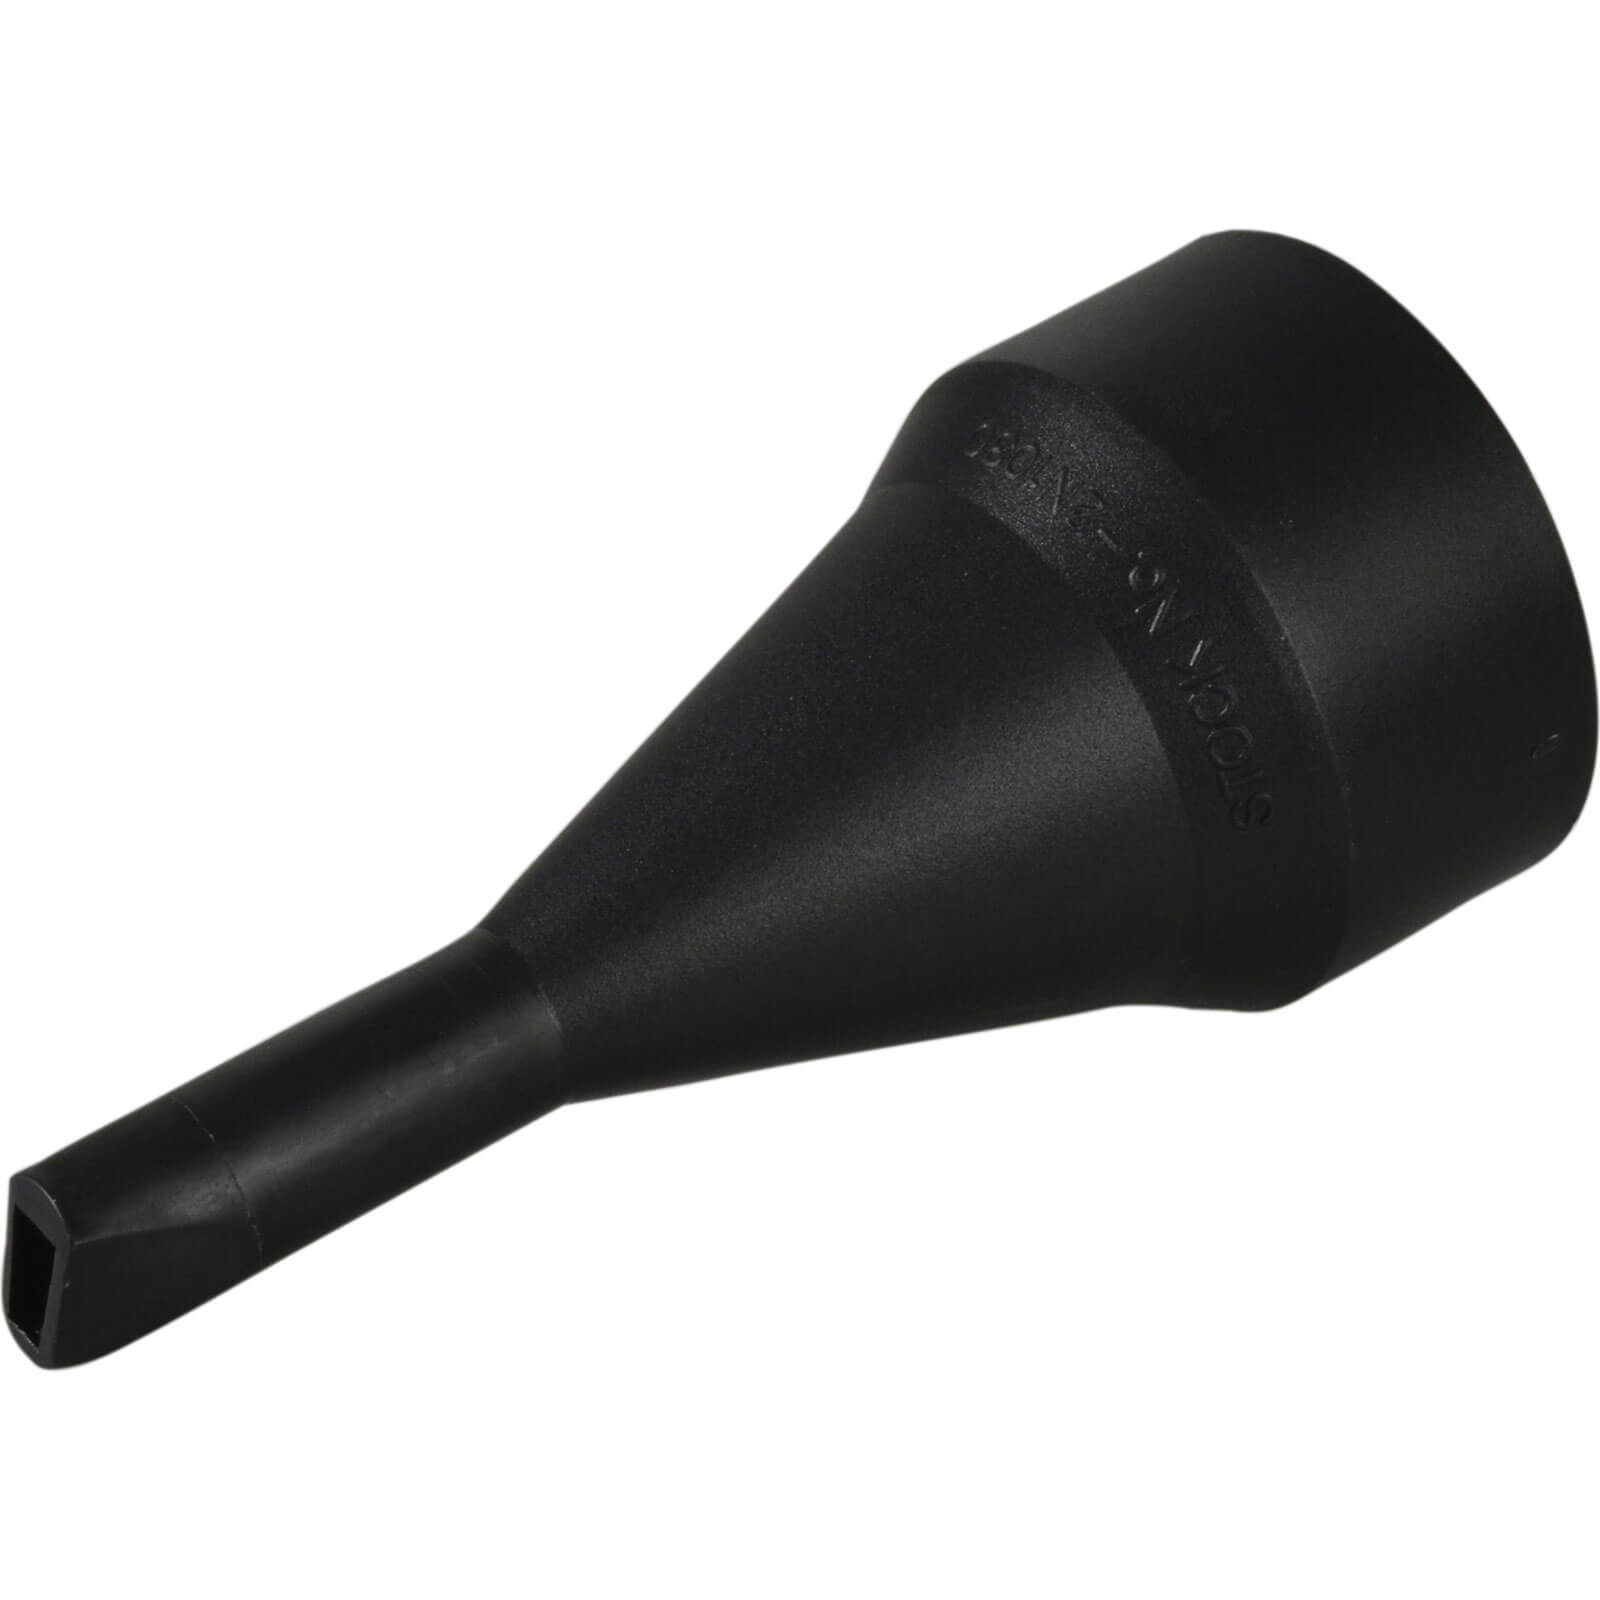 Cox 2n1030 Black Nozzle For Pointing